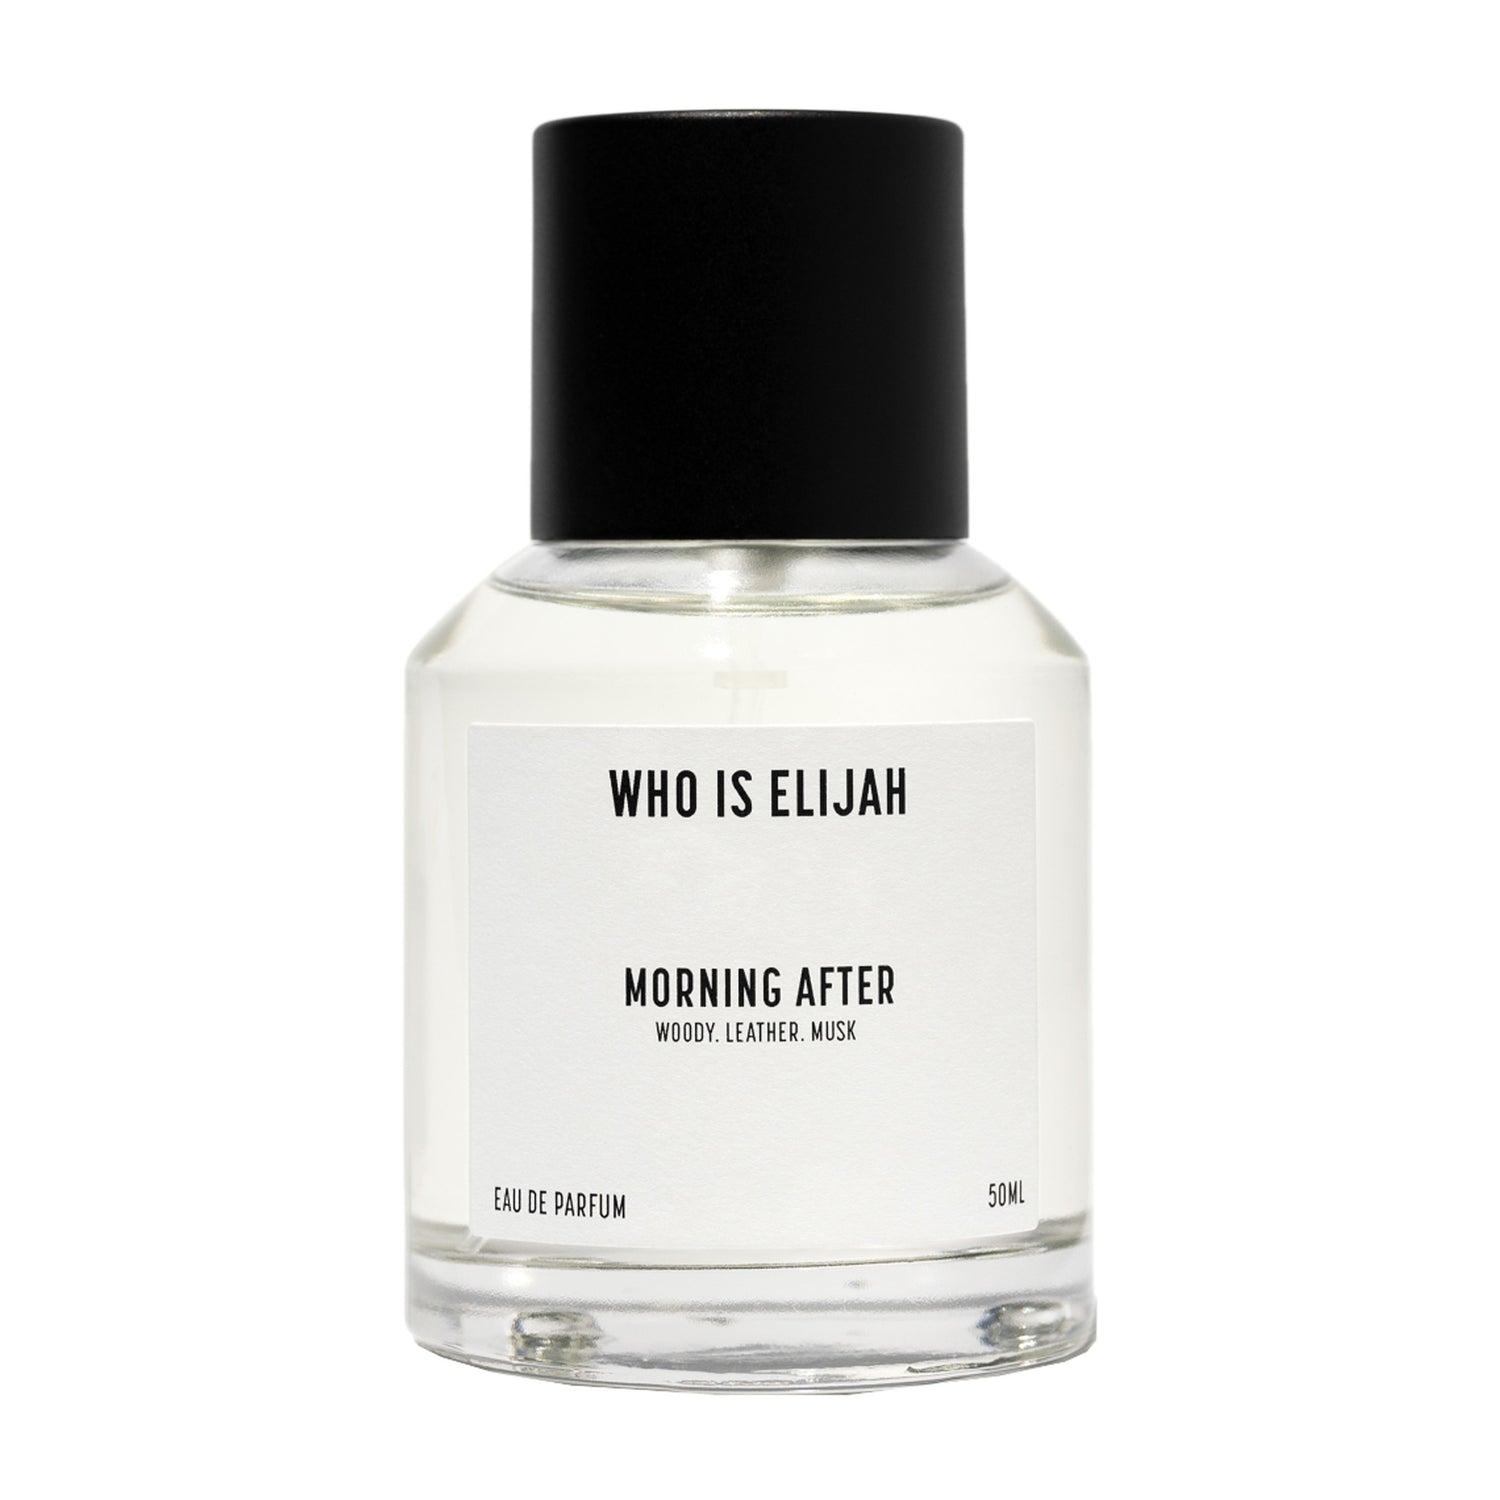 who is elijah Morning After 50ml